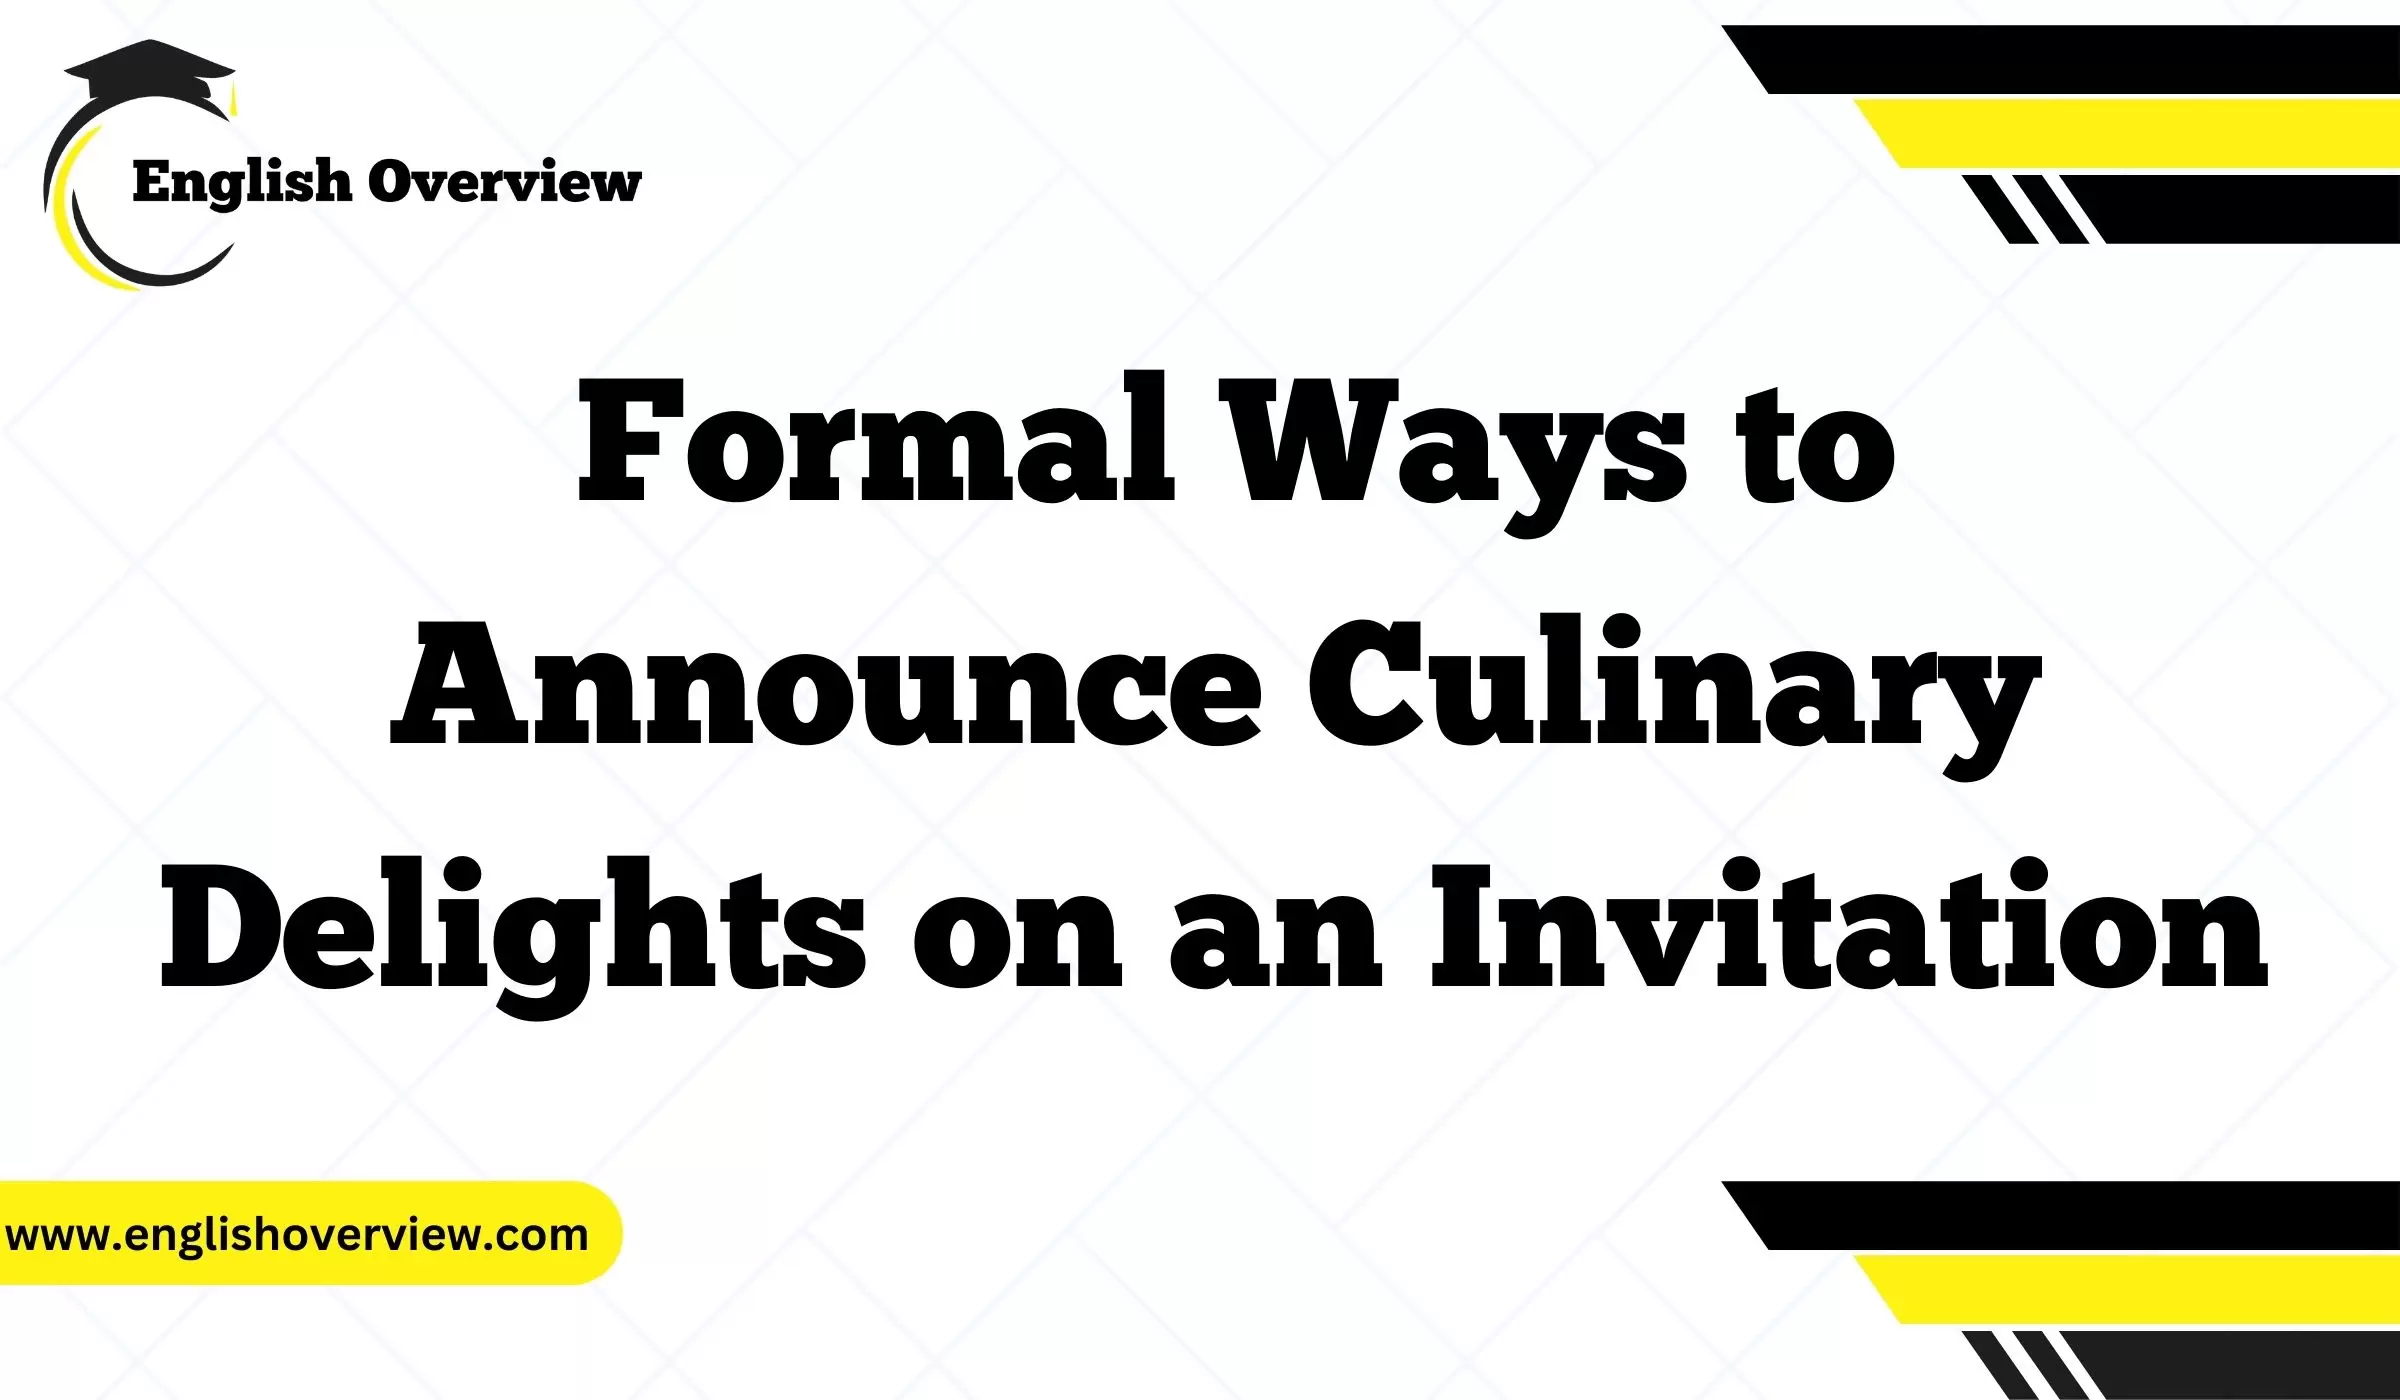 Formal Ways to Announce Culinary Delights on an Invitation